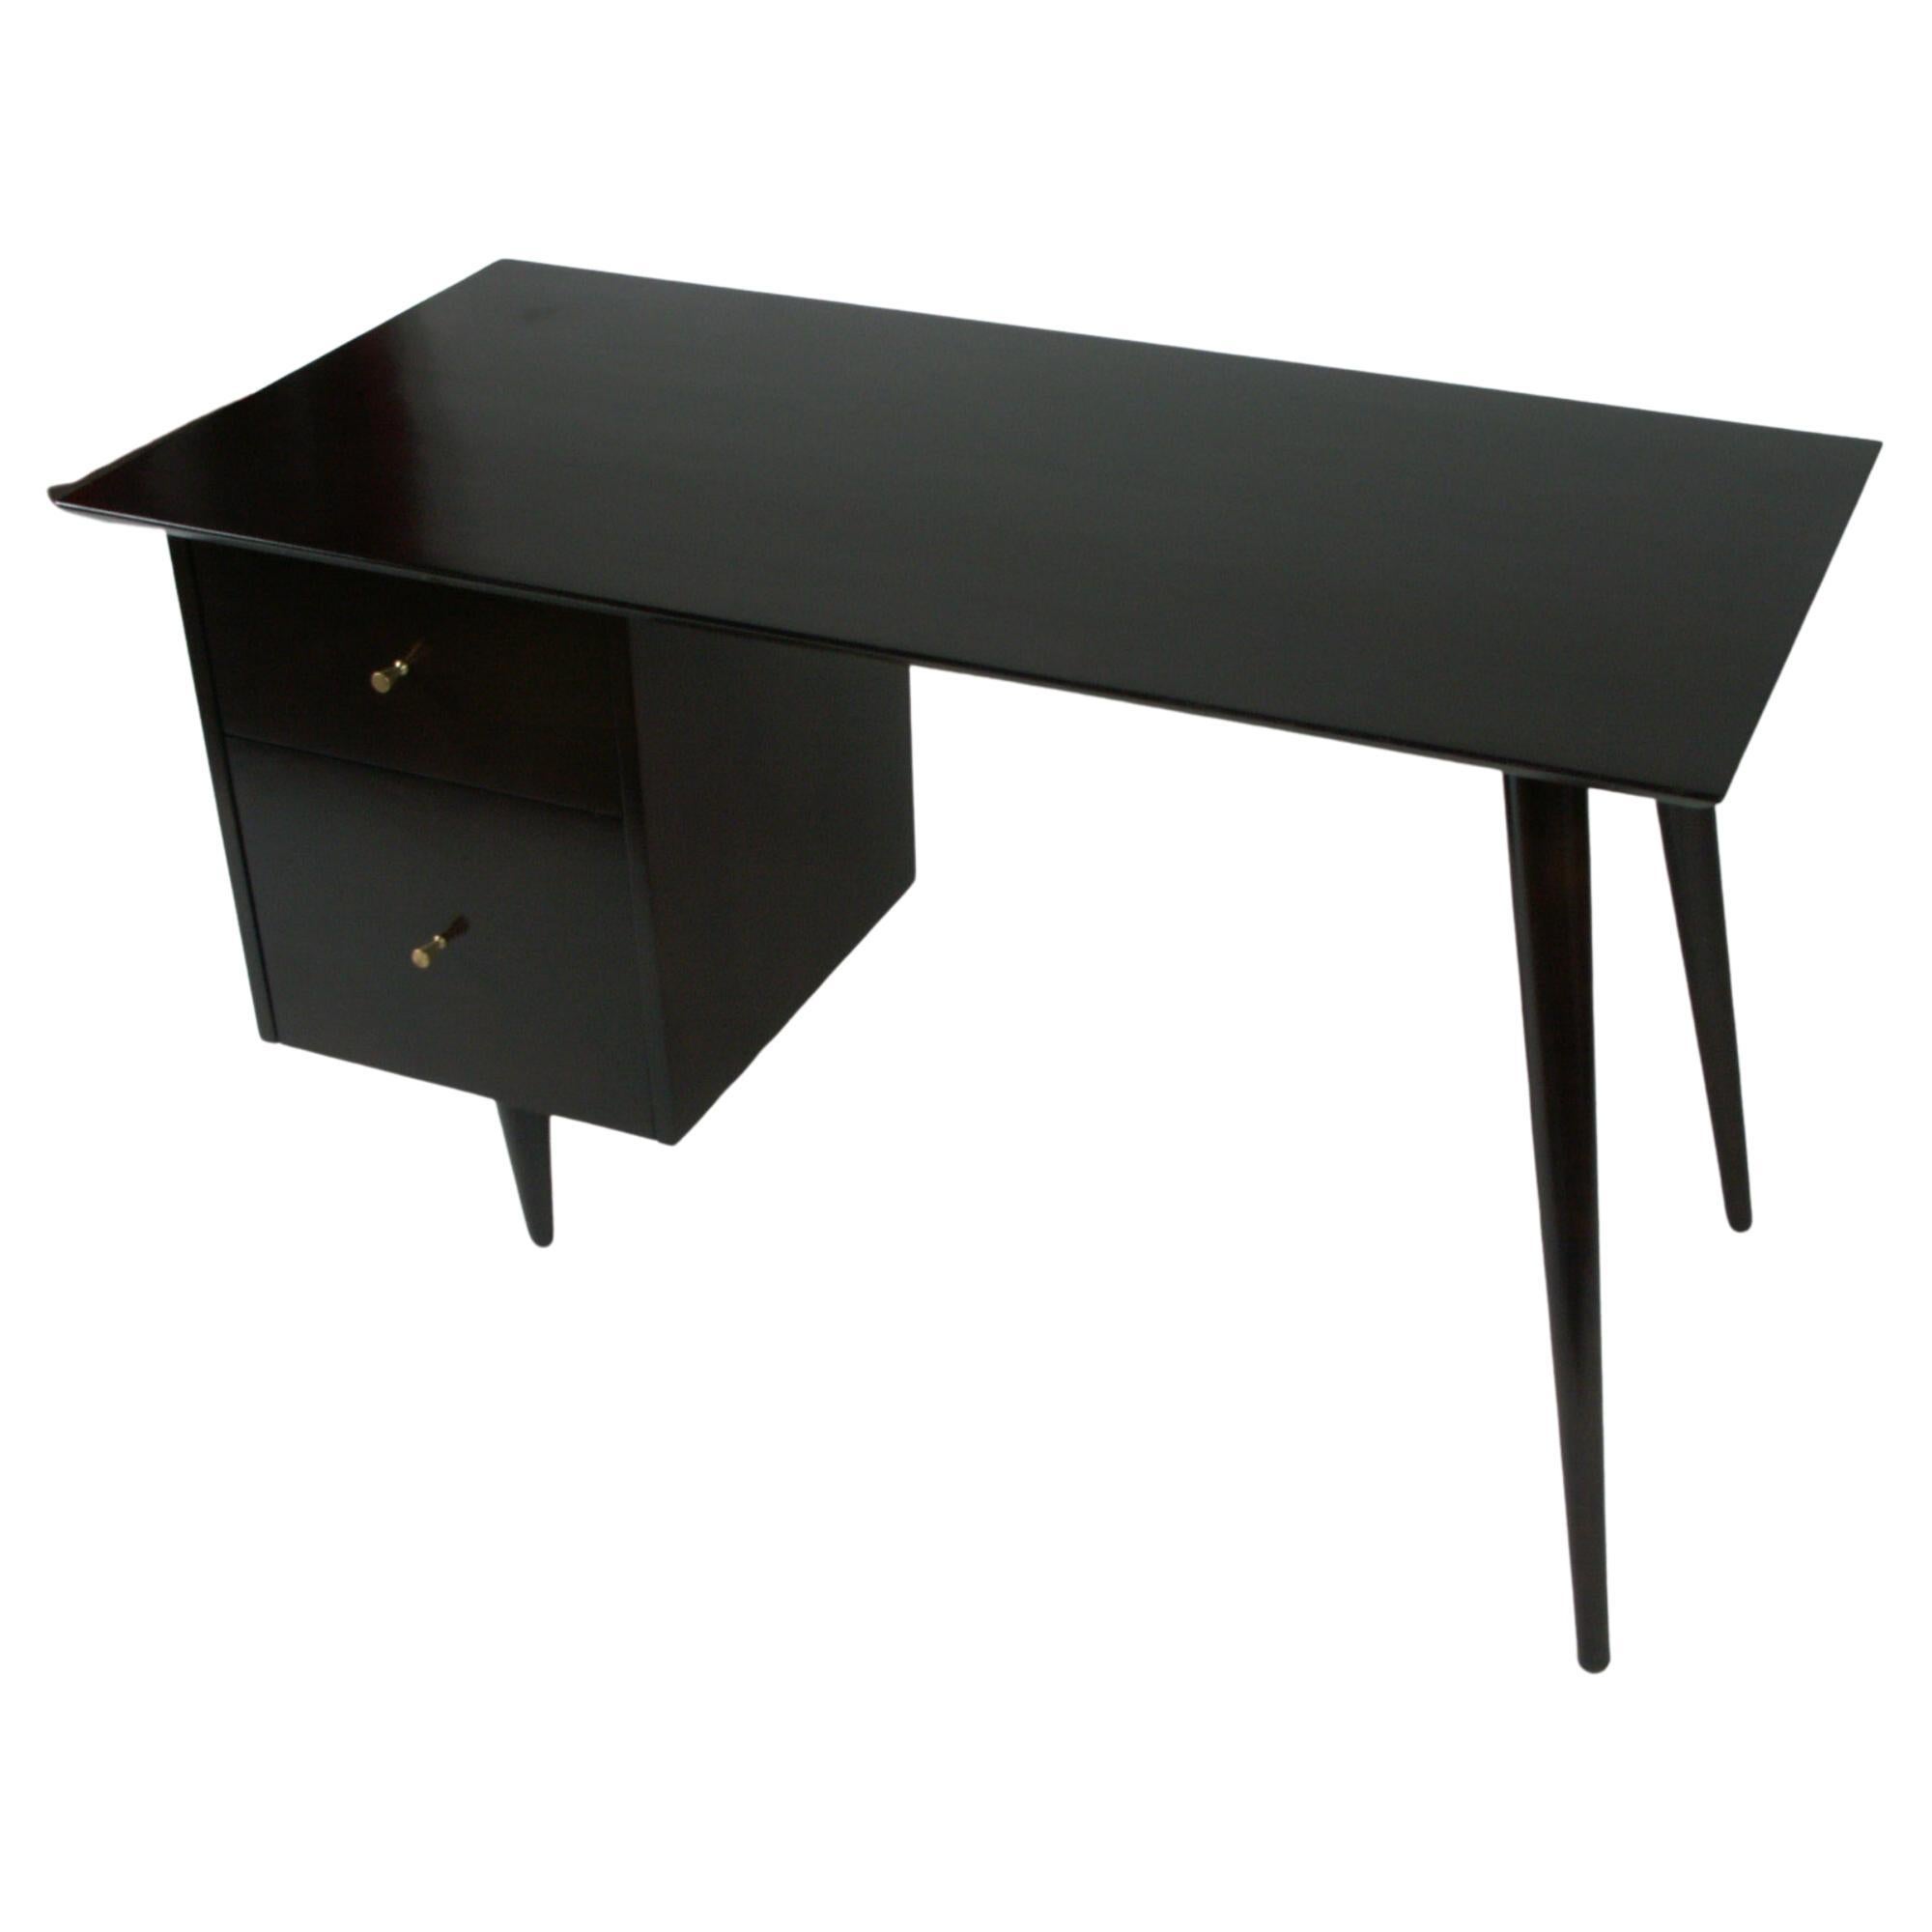 Paul McCobb Planner Group desk shown in dark espresso stain, with bank of drawers with polished tapered brass pulls on left side and two tapered angular dowel legs on the right, To be refinished in dark espresso finish, the desk shown is sold, so